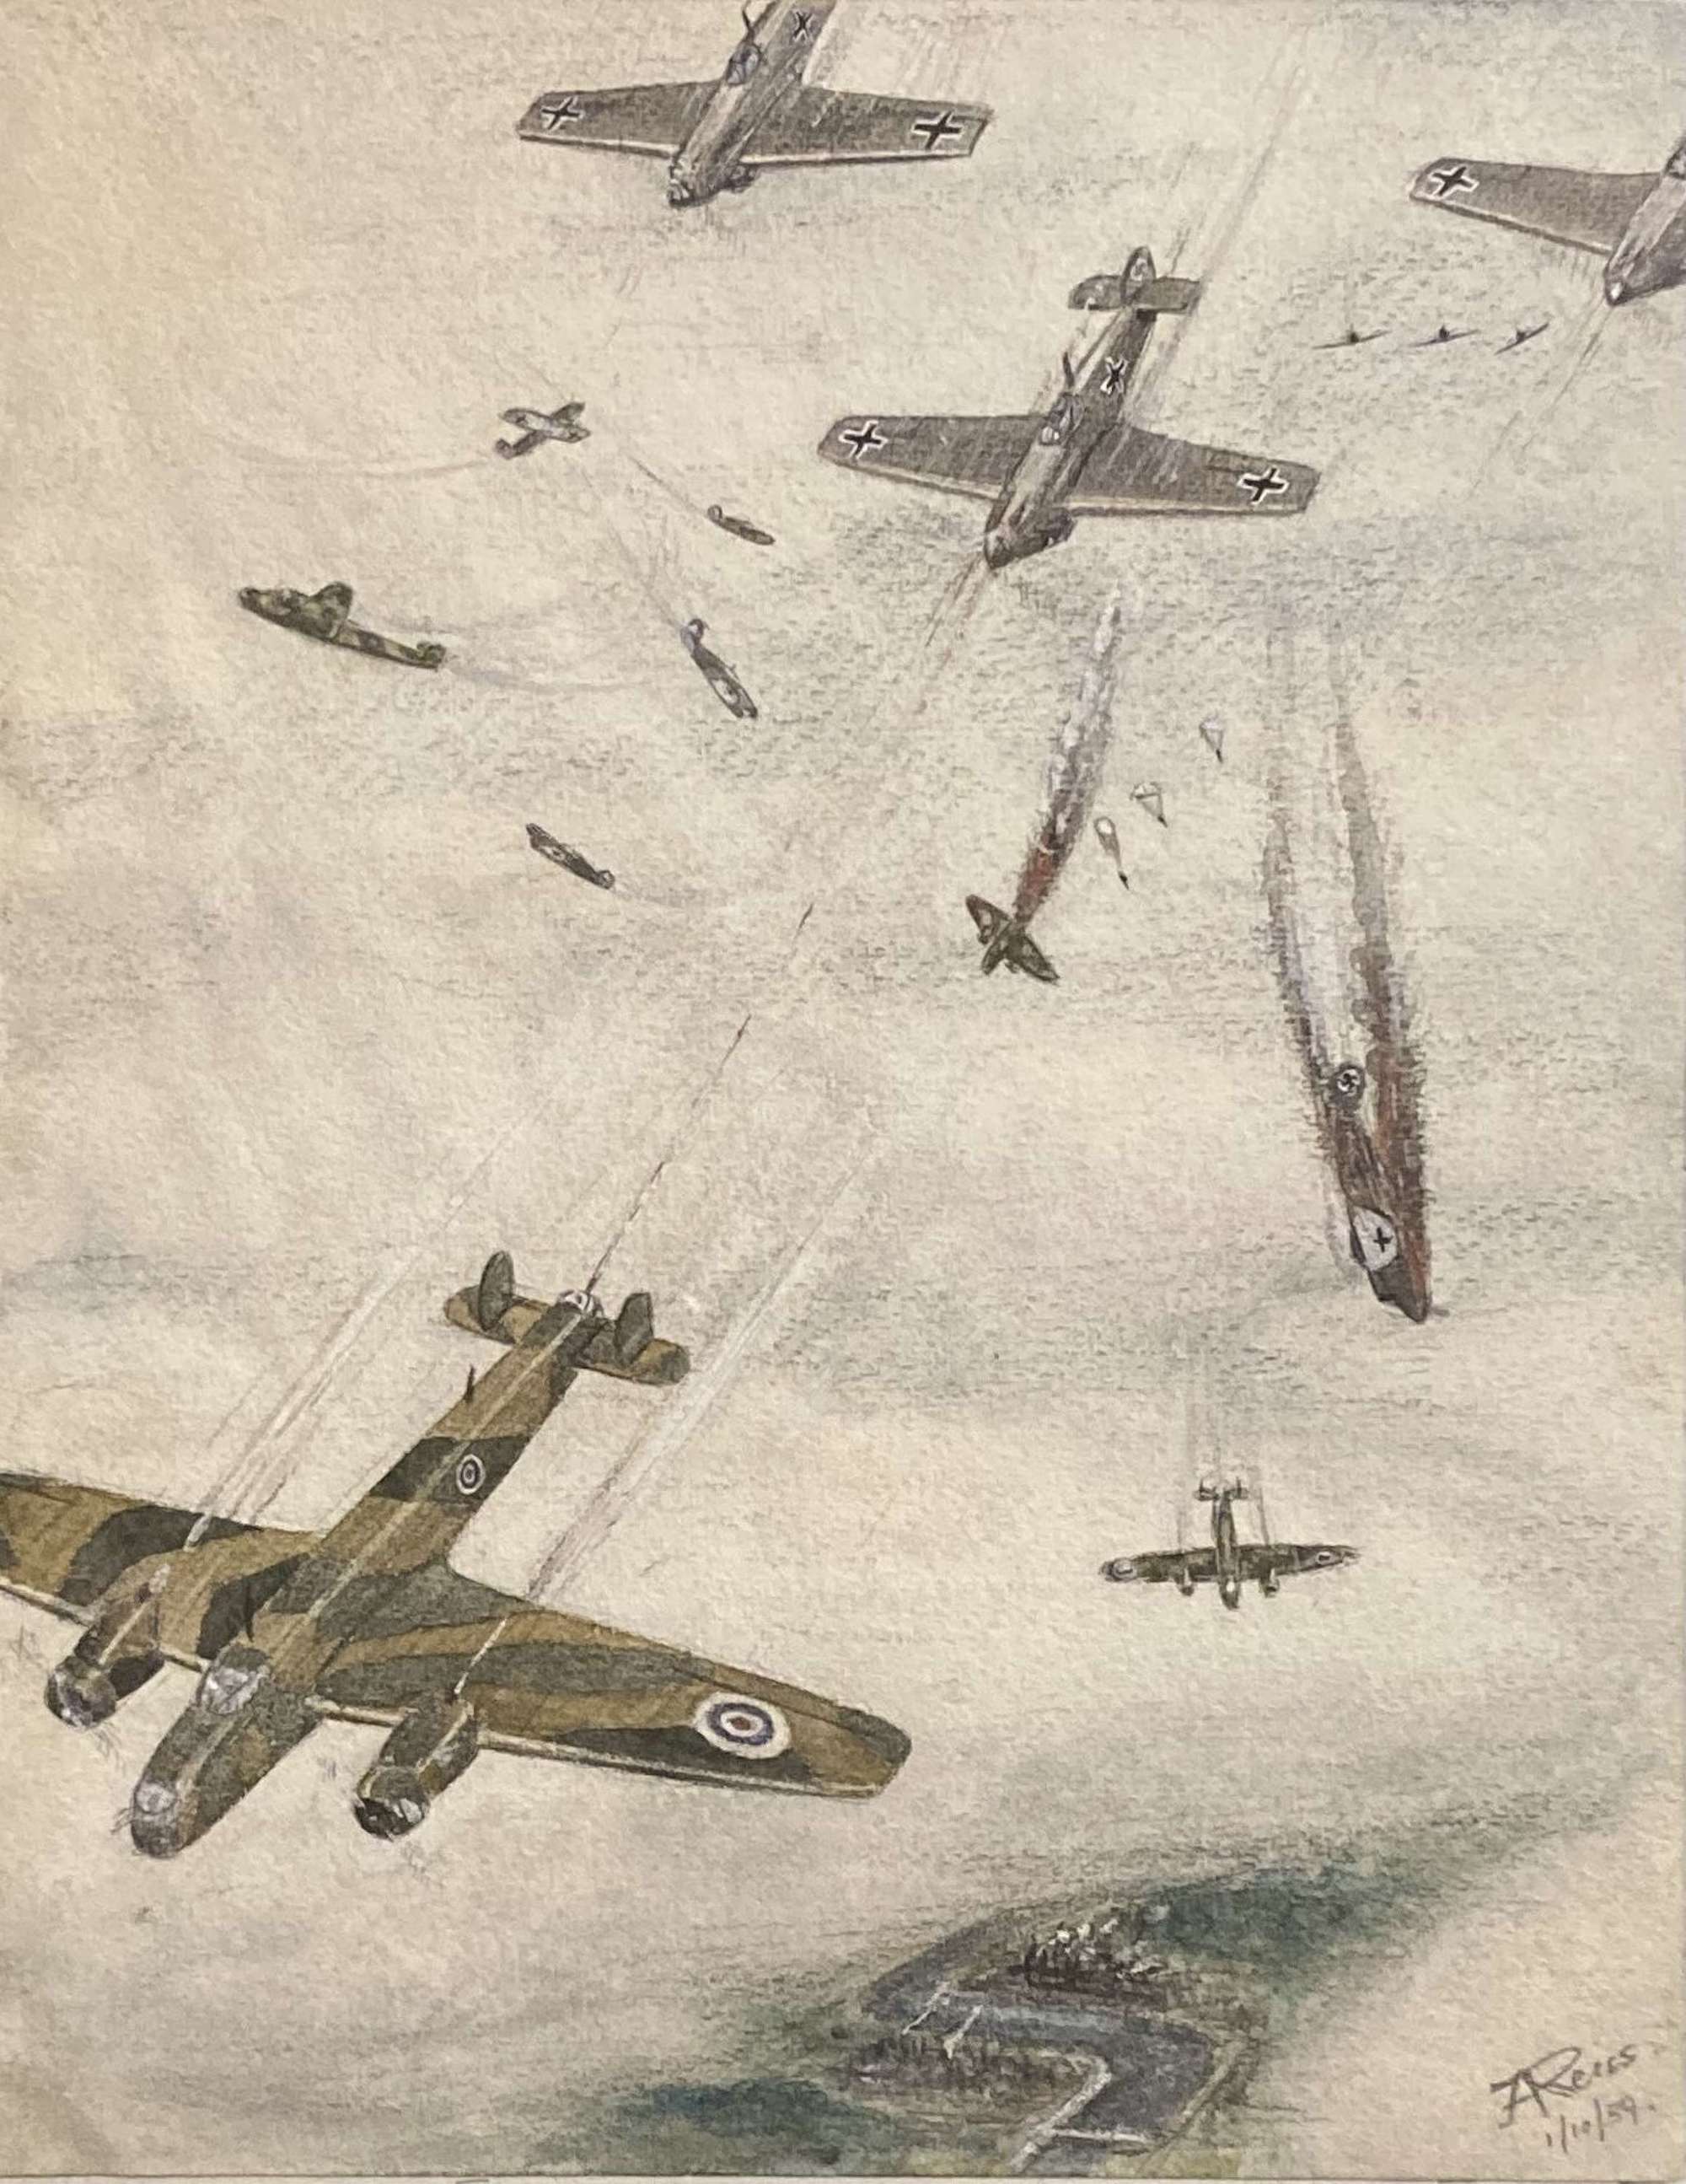 WW2 aerial combat drawing by Capt J A Reiss dated 1st October 1939